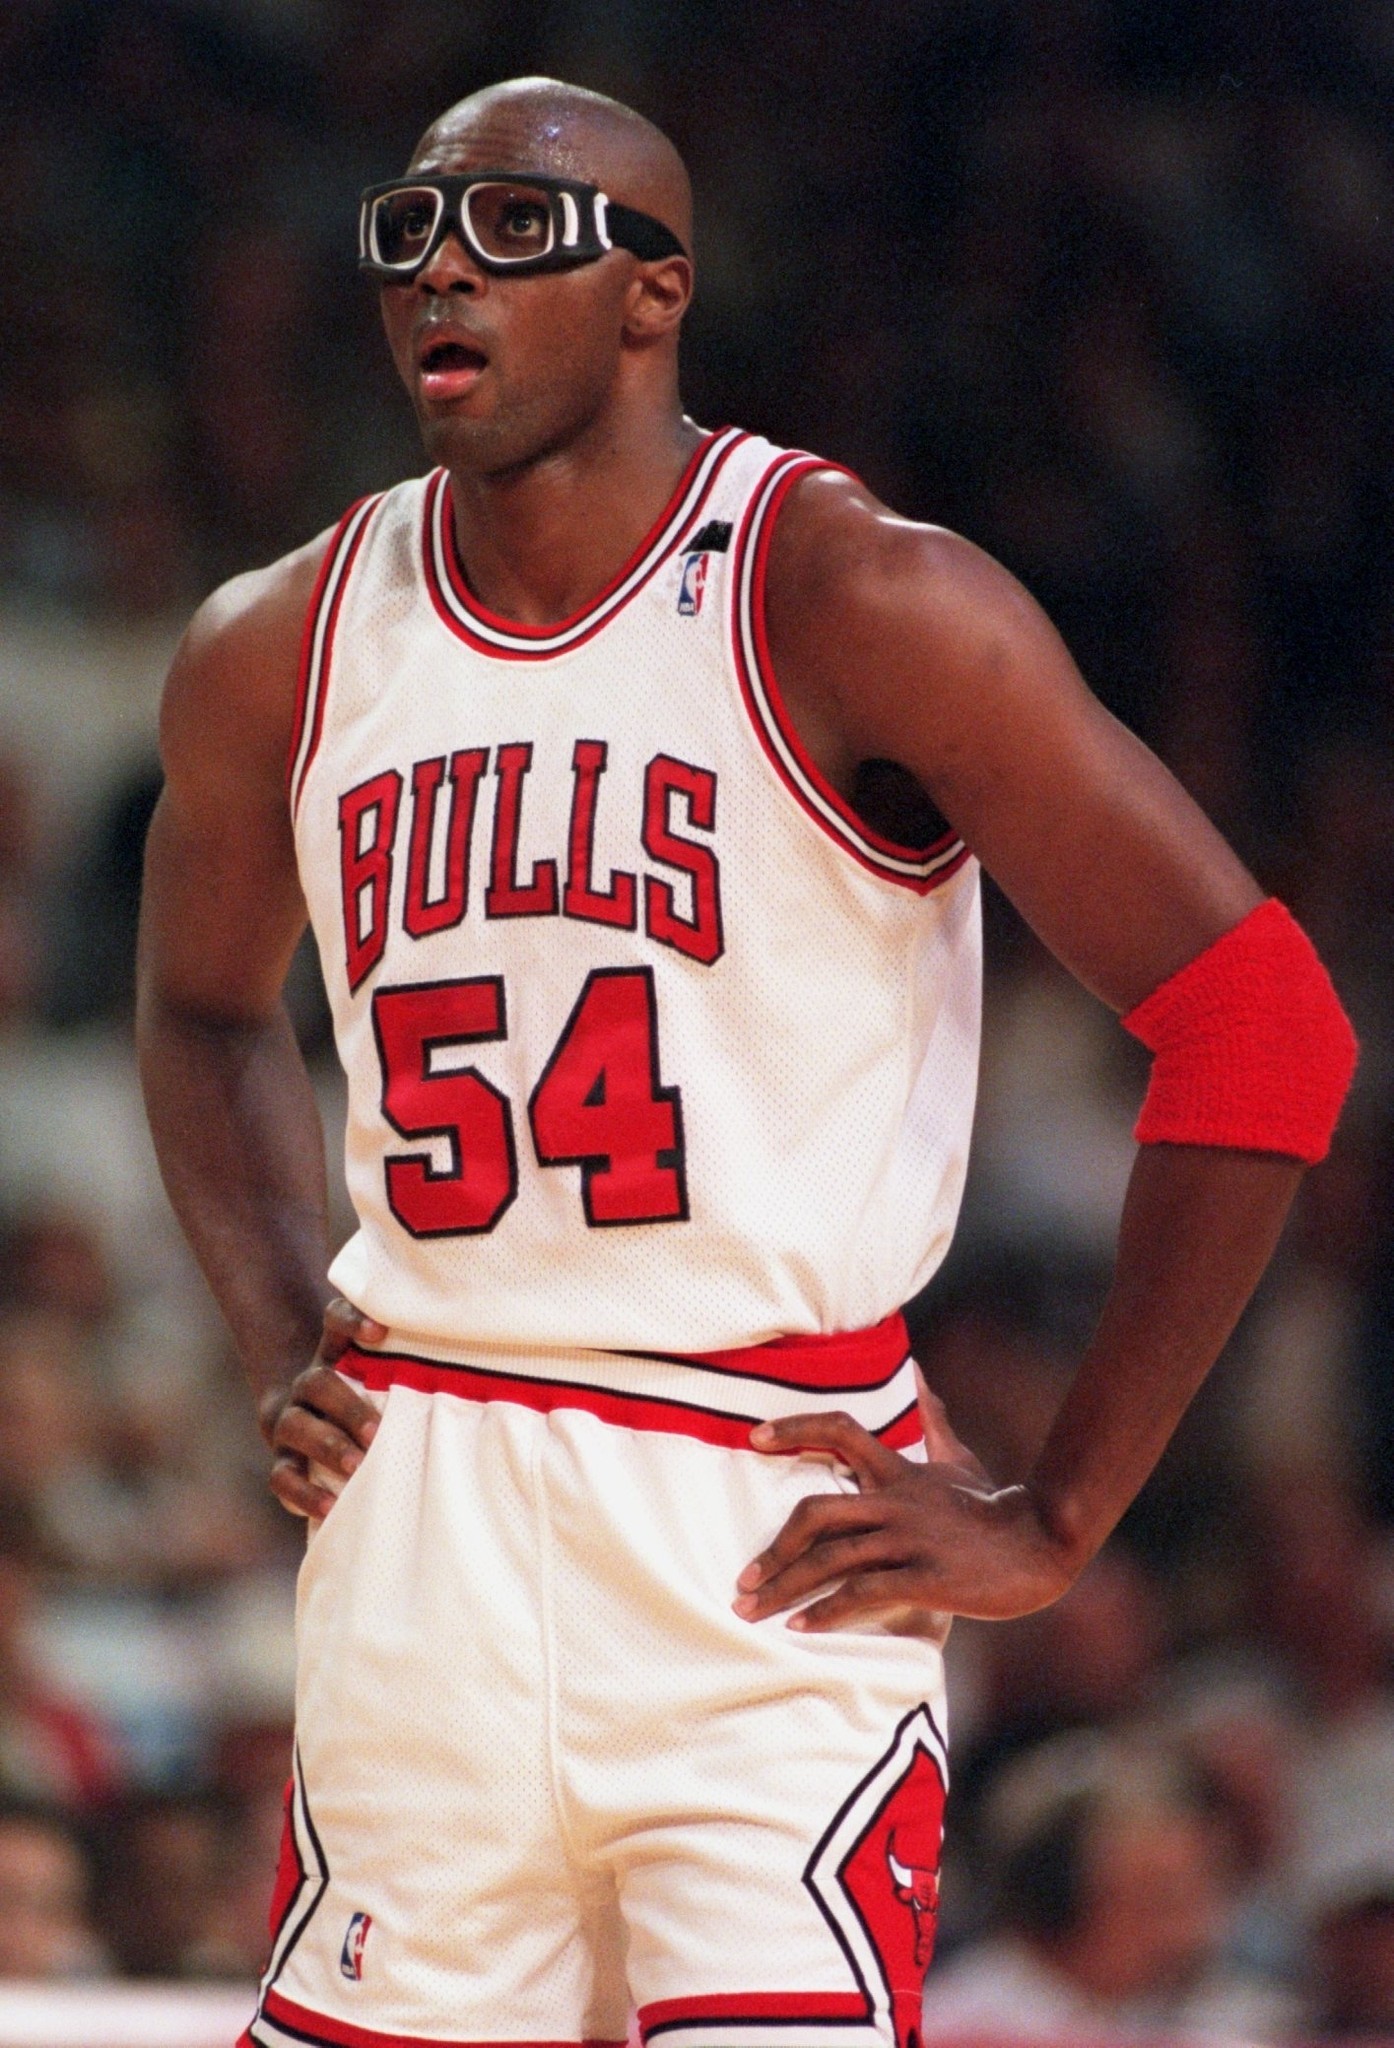 Former Bull Horace Grant will appear on 'Celebrity Family Feud' on